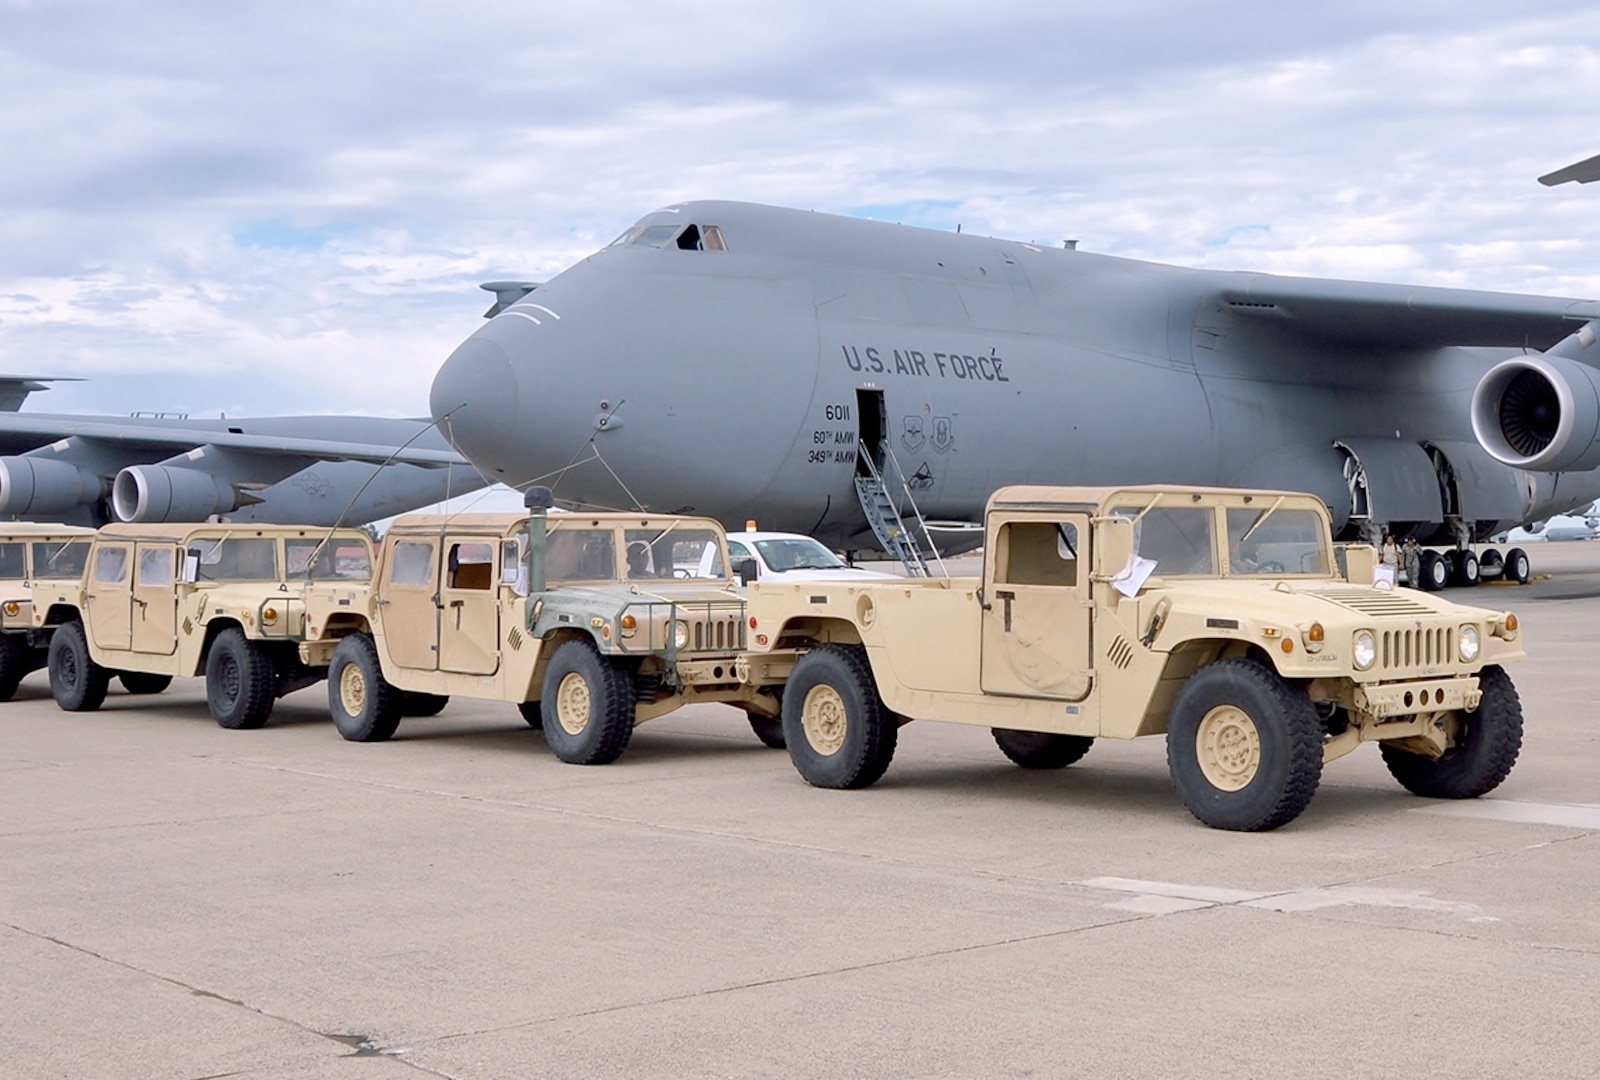 Soldiers and Airmen prepare to load HMMWVs aboard C-5 for transport to Moffett Air Field during movement of HMMWVs and Soldiers from Travis Air Force Base in Fairfield, Calif., to Moffett Air Field in Sunnyvale, Calif., Aug. 4, 2015, during the Big Logistics-Over-The-Shore exercise, July 25-Aug. 7, 2015.